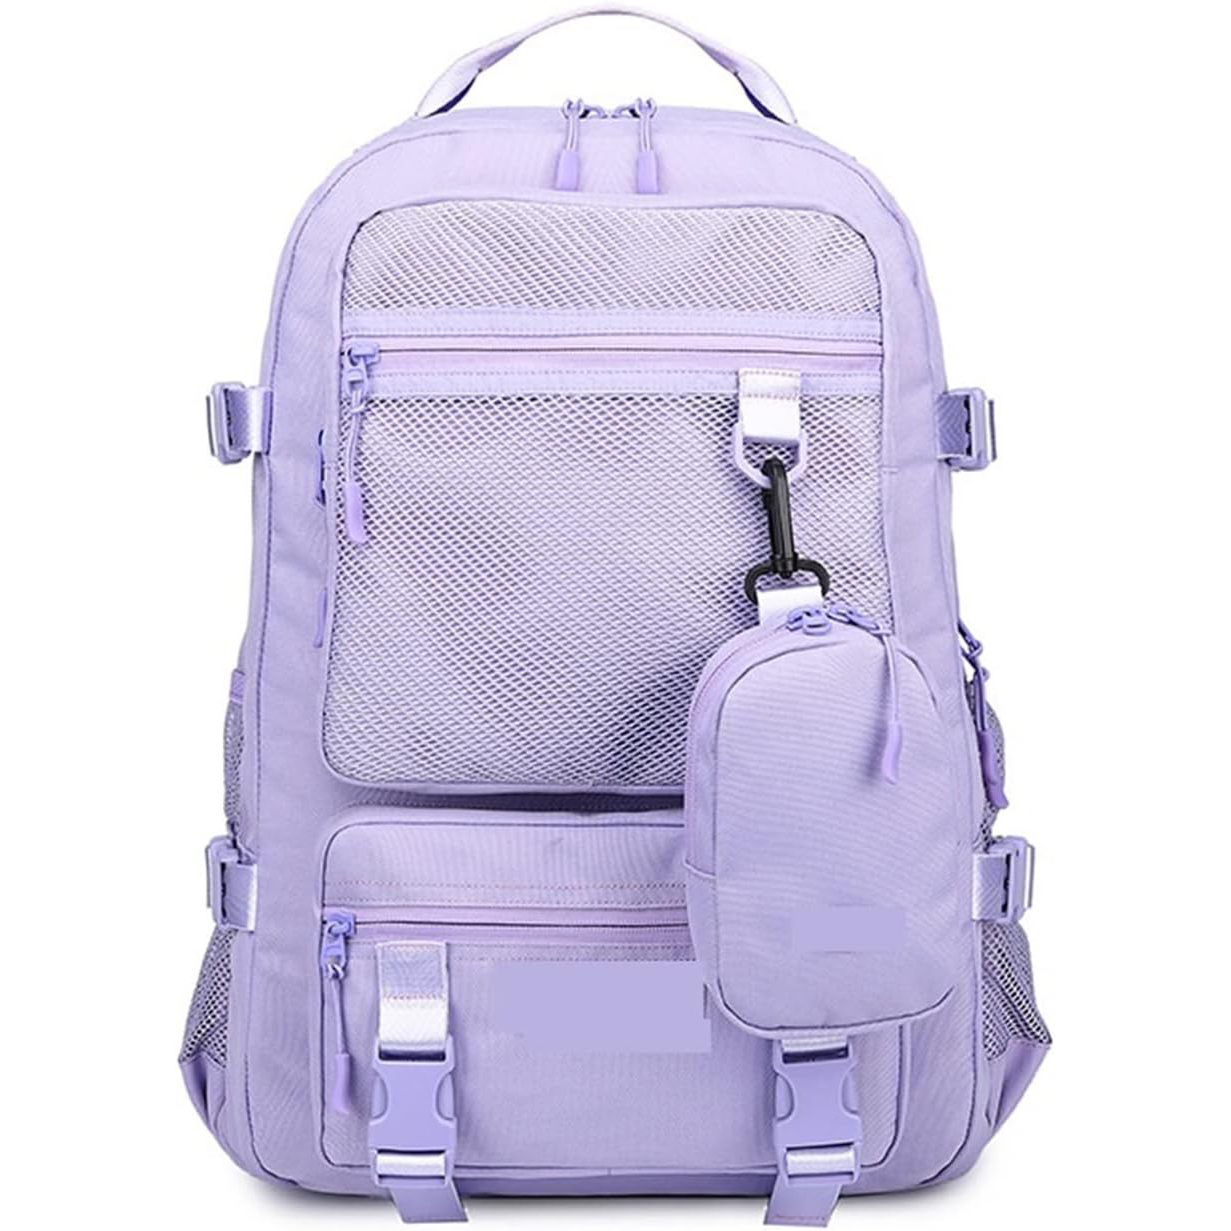 School Laptop Backpack Female High School Student Schoolbag Large Capacity Fashion Backpack Male